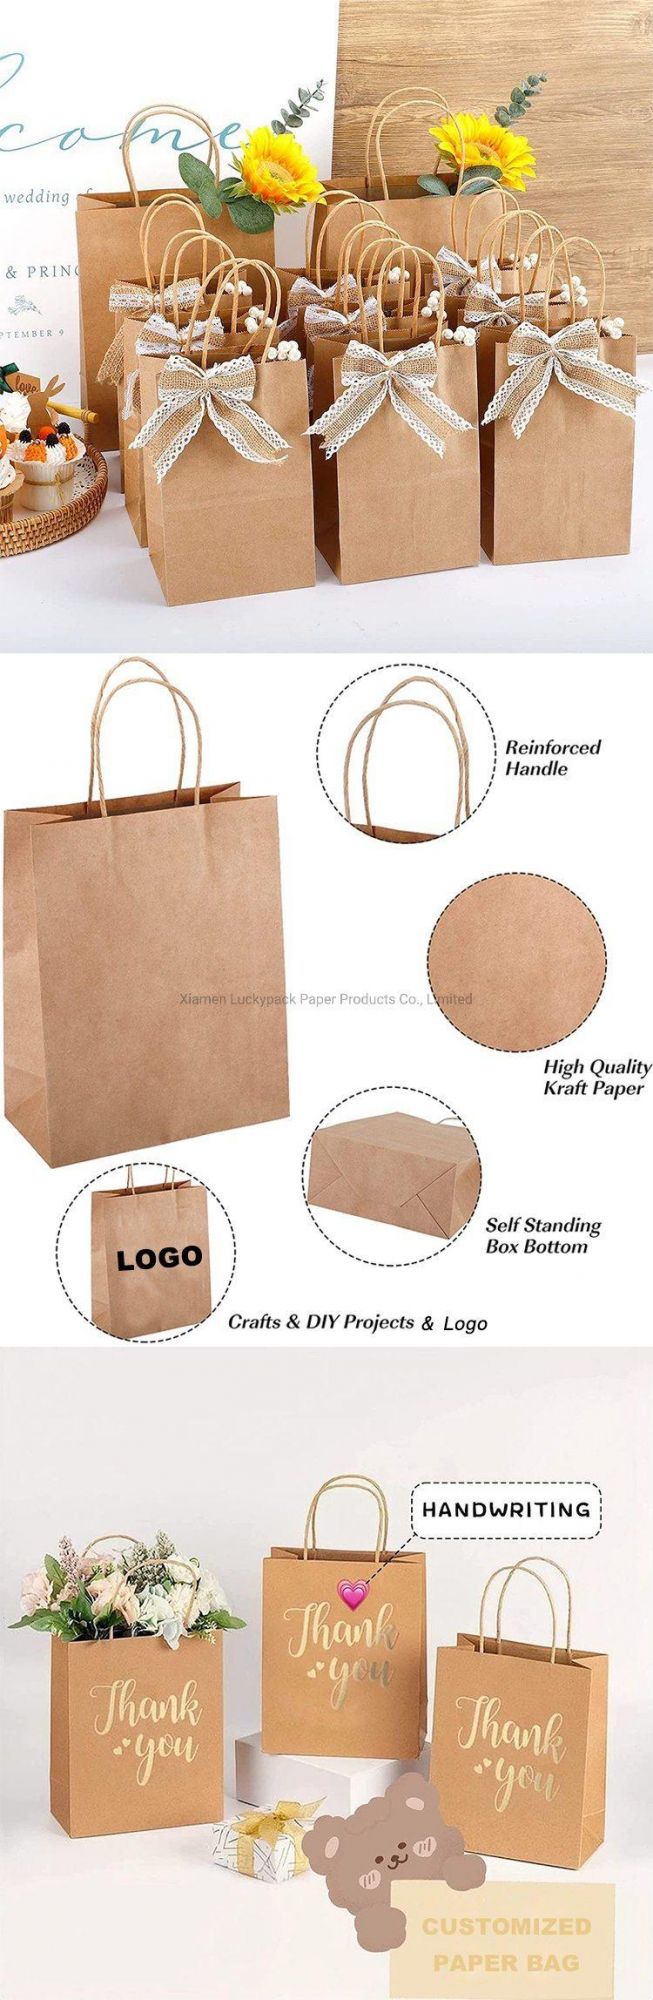 Luxury Color Printed Custom Sizes Product Paper Packaging Bag